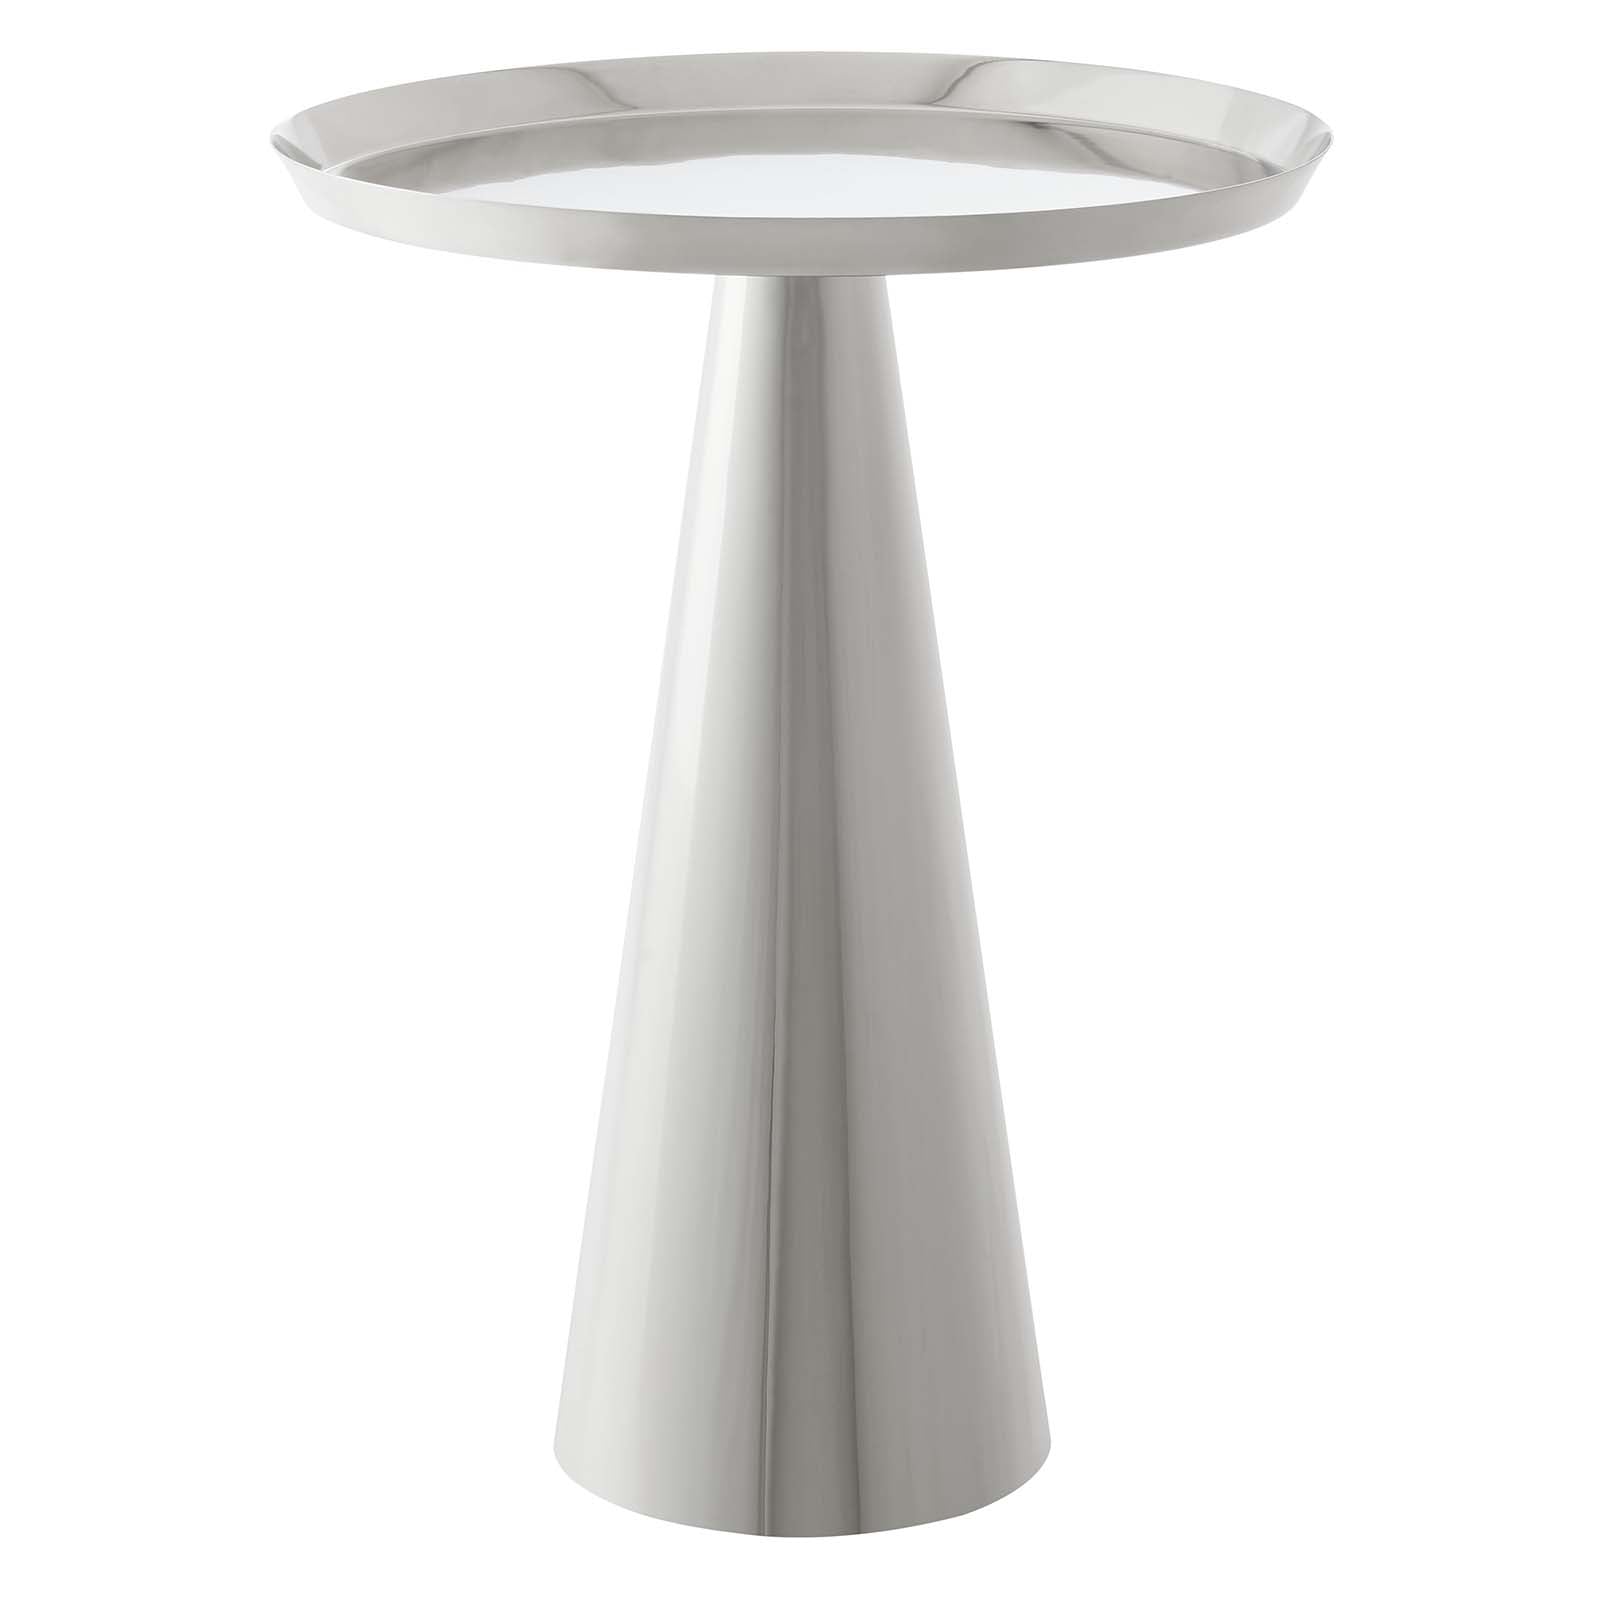 Maren Round Side Table - East Shore Modern Home Furnishings